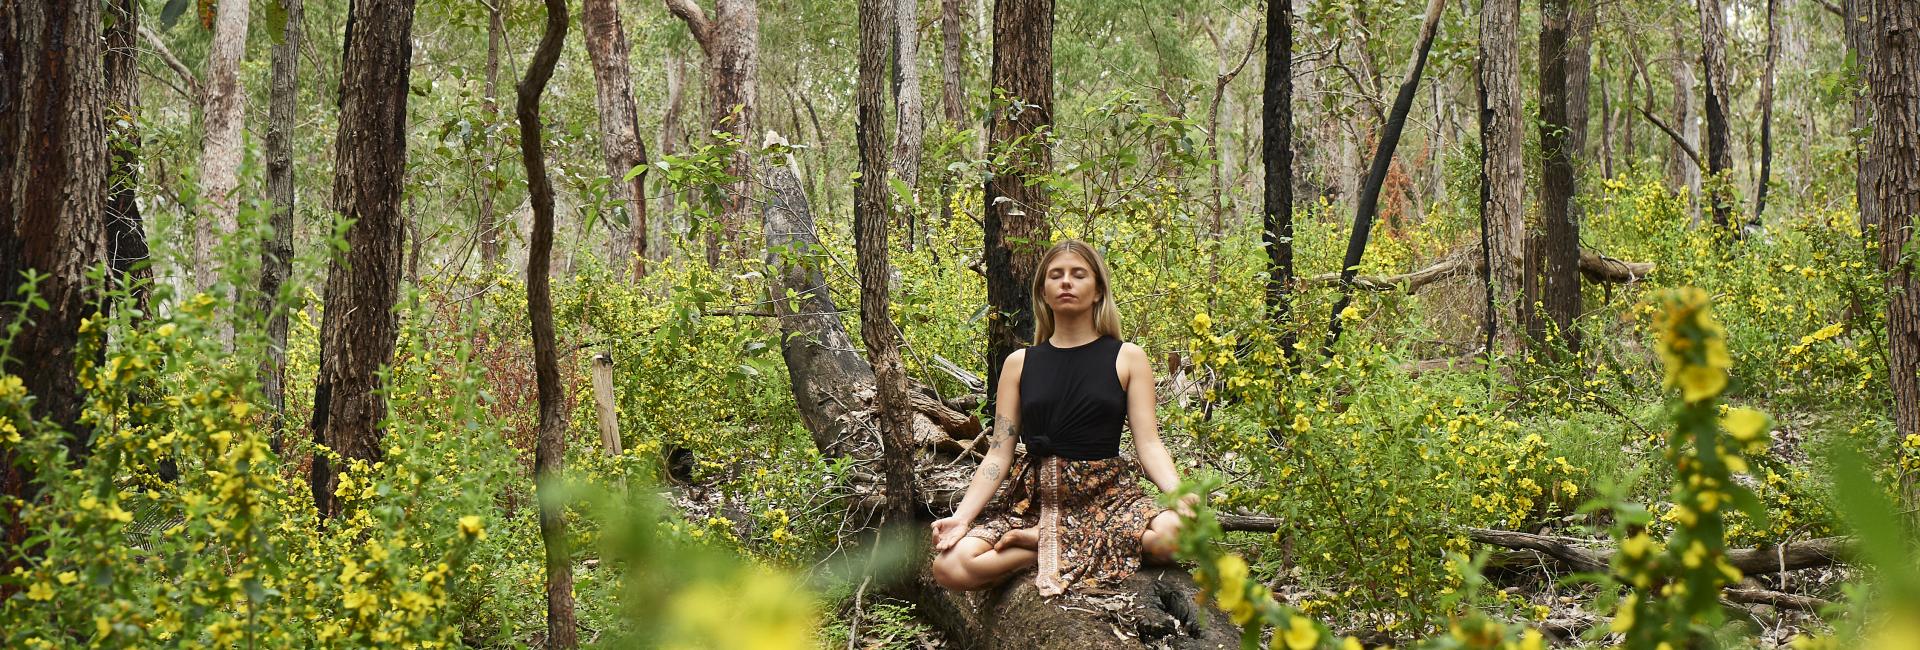 A girl sits cross legged meditating in a lush green forest